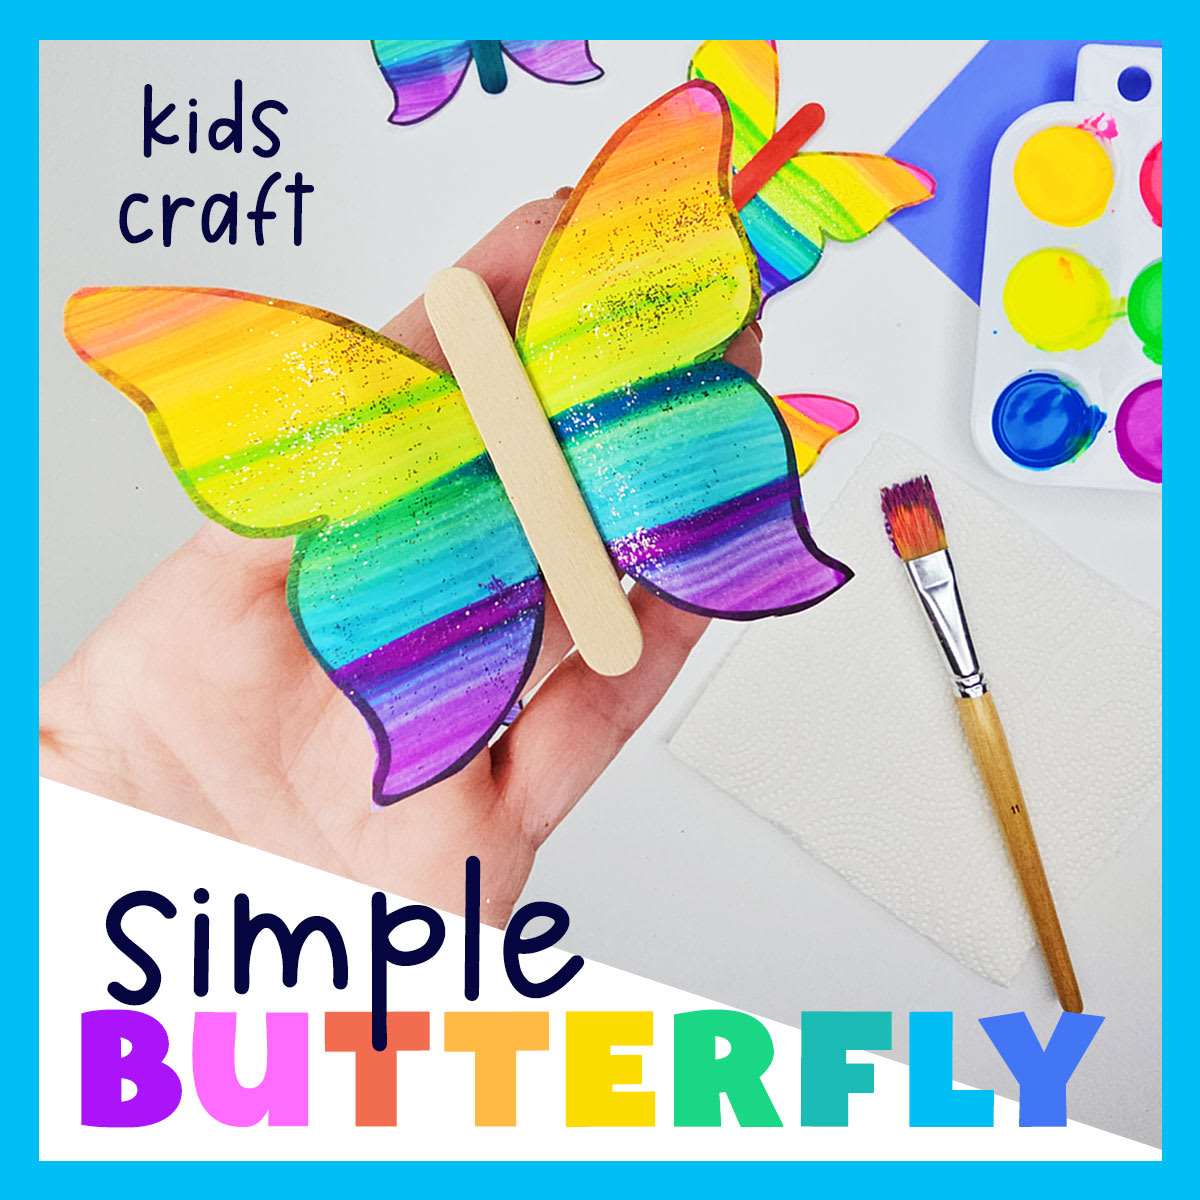 DIY colorful Paper Butterfly craft for Kids or decorations